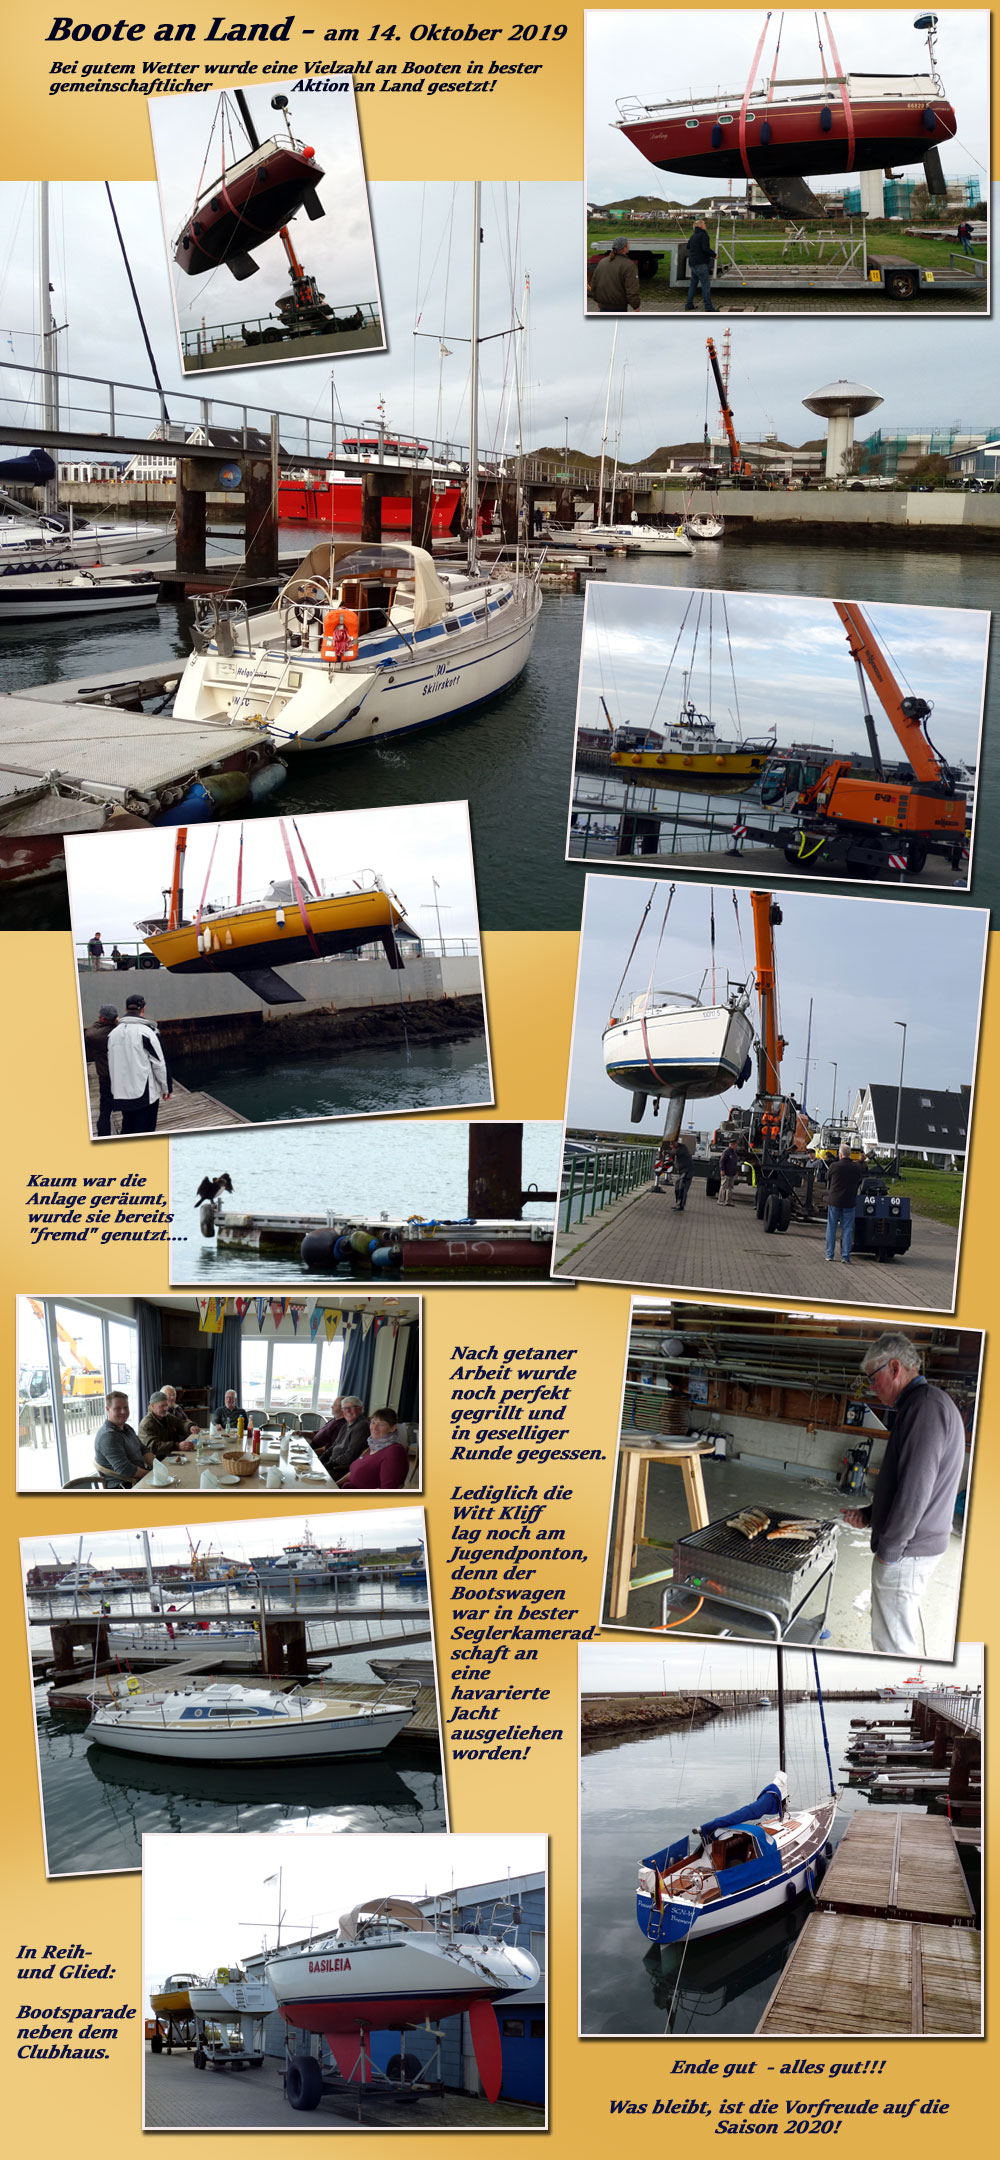 Boote an Land 2019